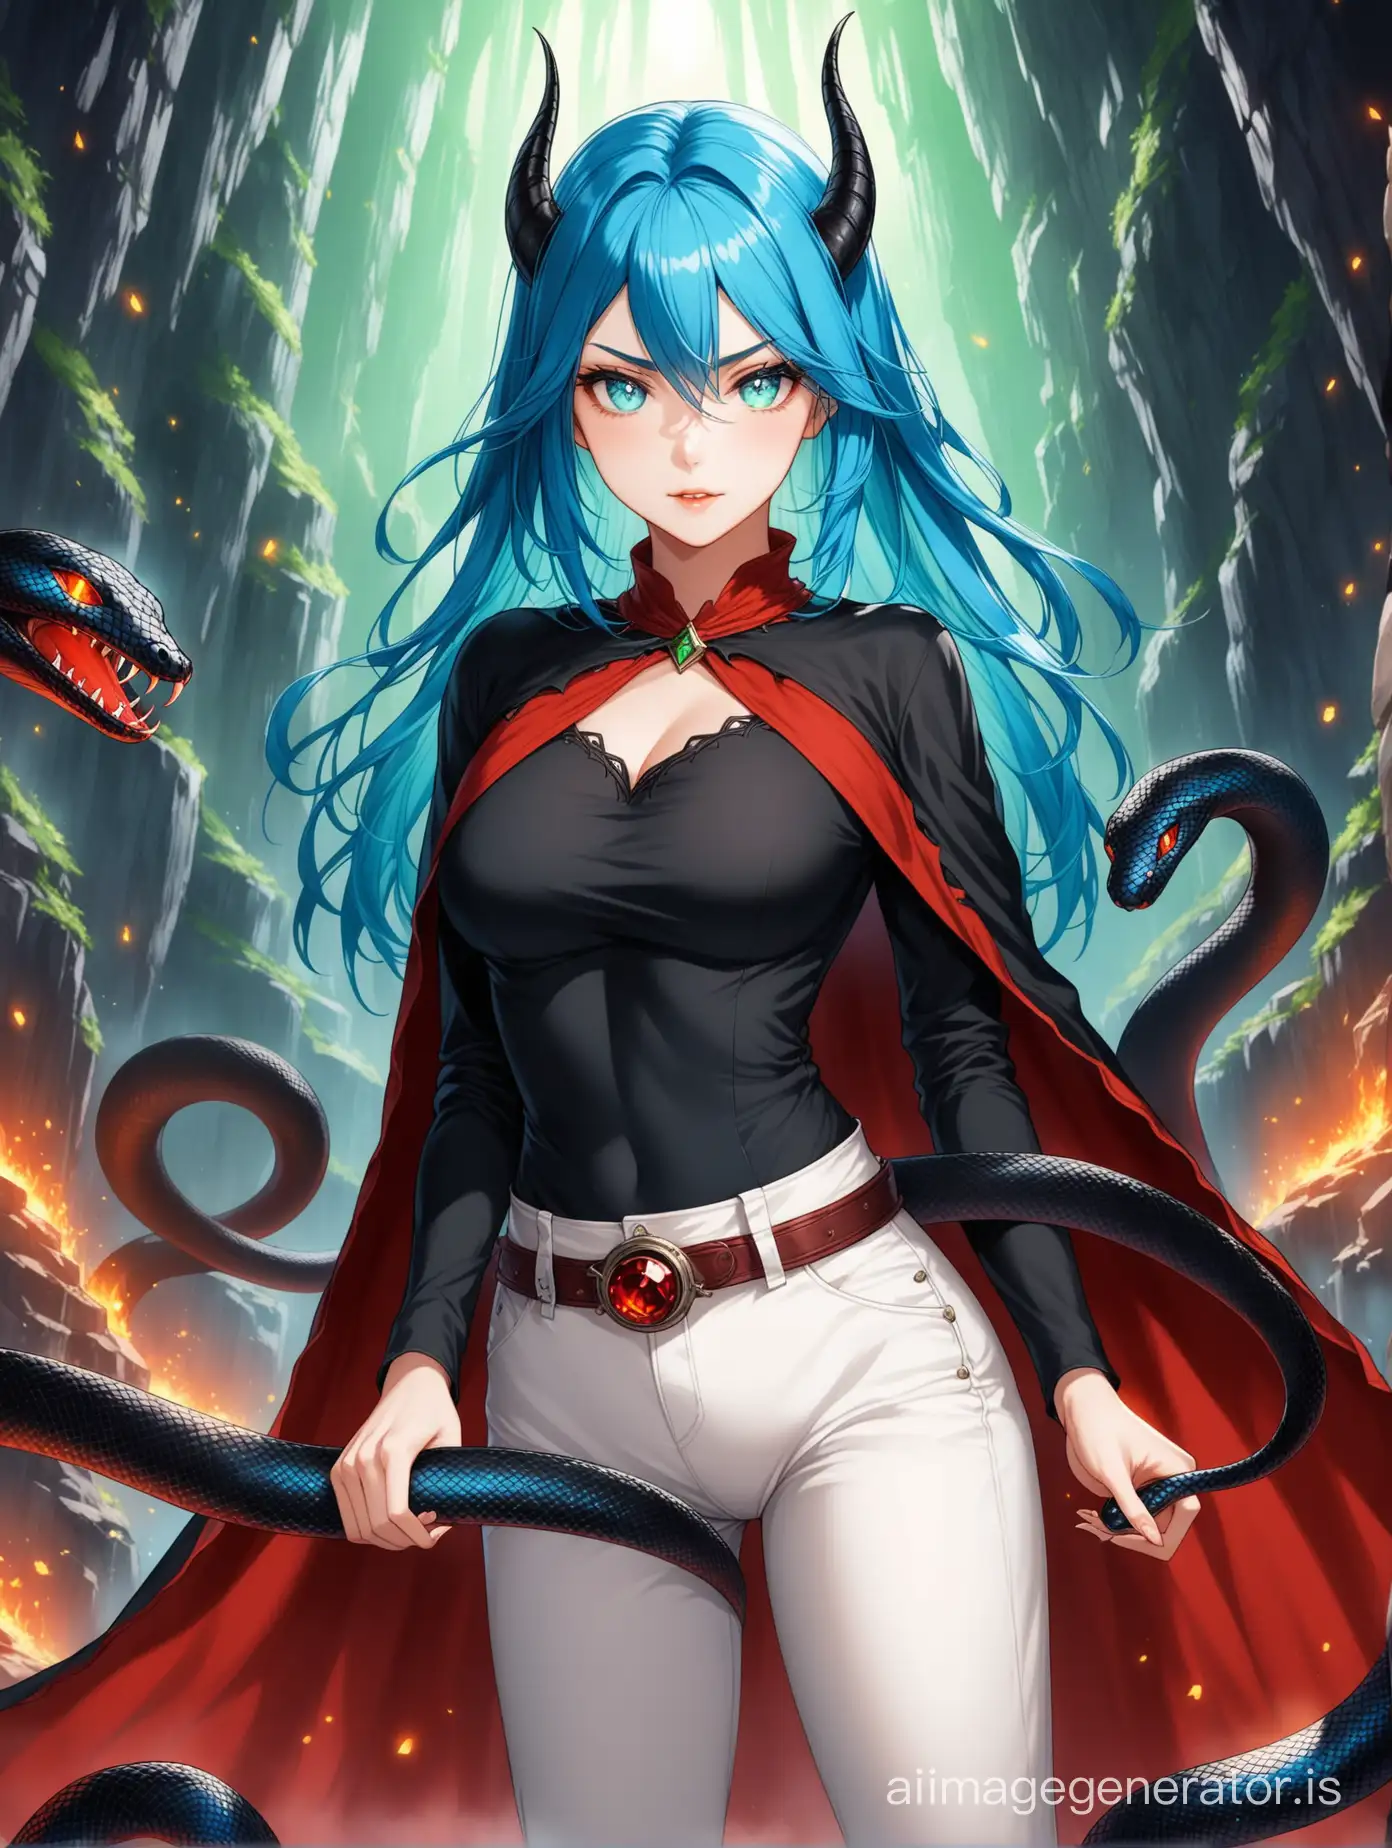 Enchanting-Sorceress-with-Blue-Hair-in-Magical-Mine-Setting